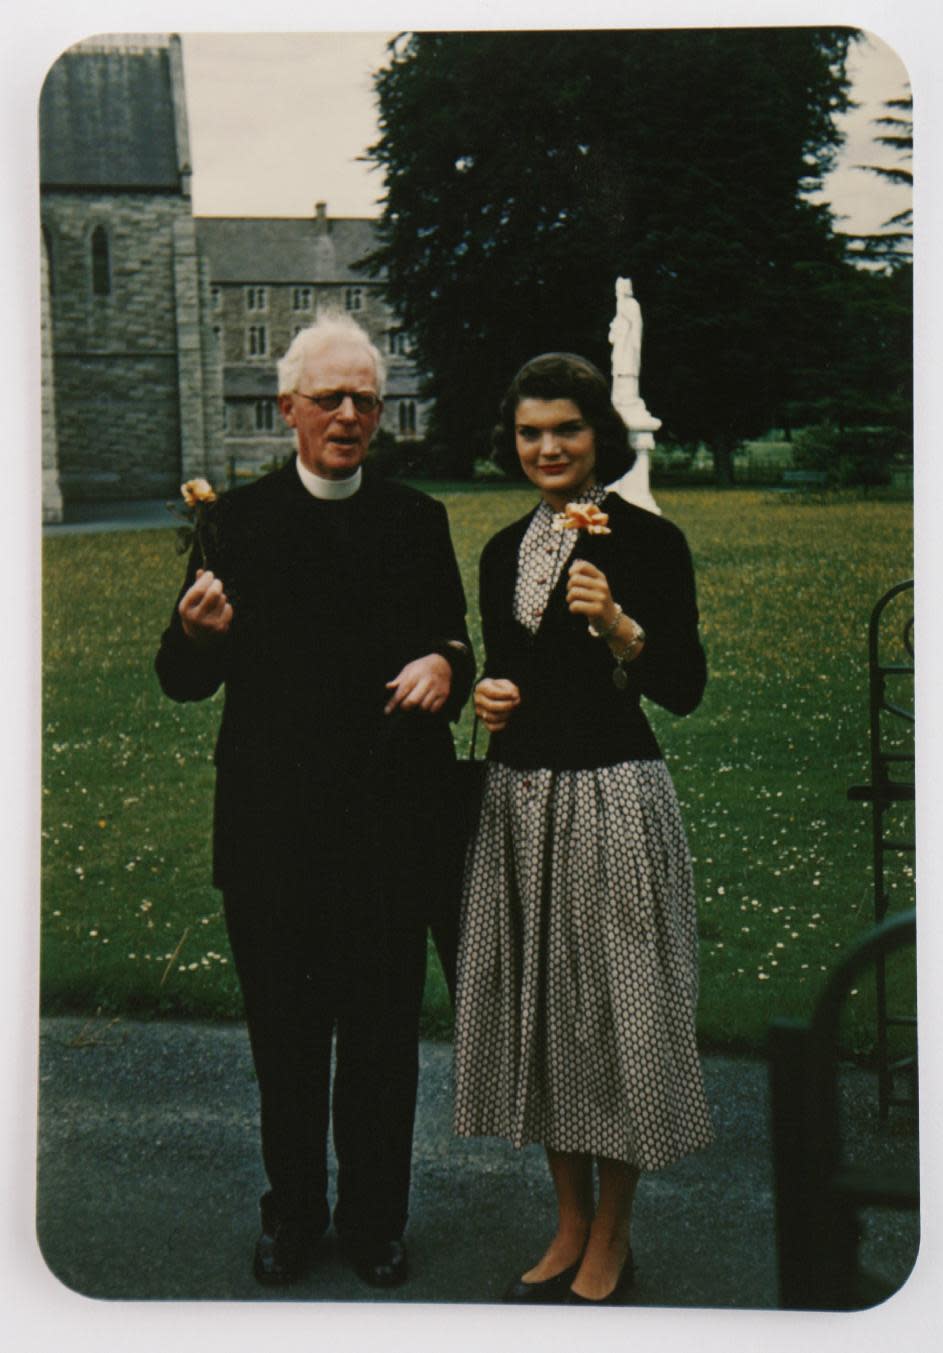 In this image made available by Sheppard's Irish Auction House made available on Wednesday May 14, 2014 shows Rev. Joseph Leonard with Jacqueline Kennedy at All Hallows College in Dublin Ireland in 1950. Letters written by Jacqueline Kennedy to an Irish priest have revealed new details about her closely guarded private thoughts. The letters are set to be auctioned next month and could fetch up to $1.6 million. The more than 30 letters were written to the Rev. Joseph Leonard. They were recently discovered in a drawer at All Hallows College. In one, she questioned her faith after the assassination of President John F. Kennedy. "I am so bitter against God," she wrote a few months after the assassination of her husband. (AP Photo/Sheppard's Irish Auction House) NO ARCHIVE ONE TIME USE ONLY ONLY TO BE USE IN CONNECTION WITH STORY RELATED TO THE AUCTION